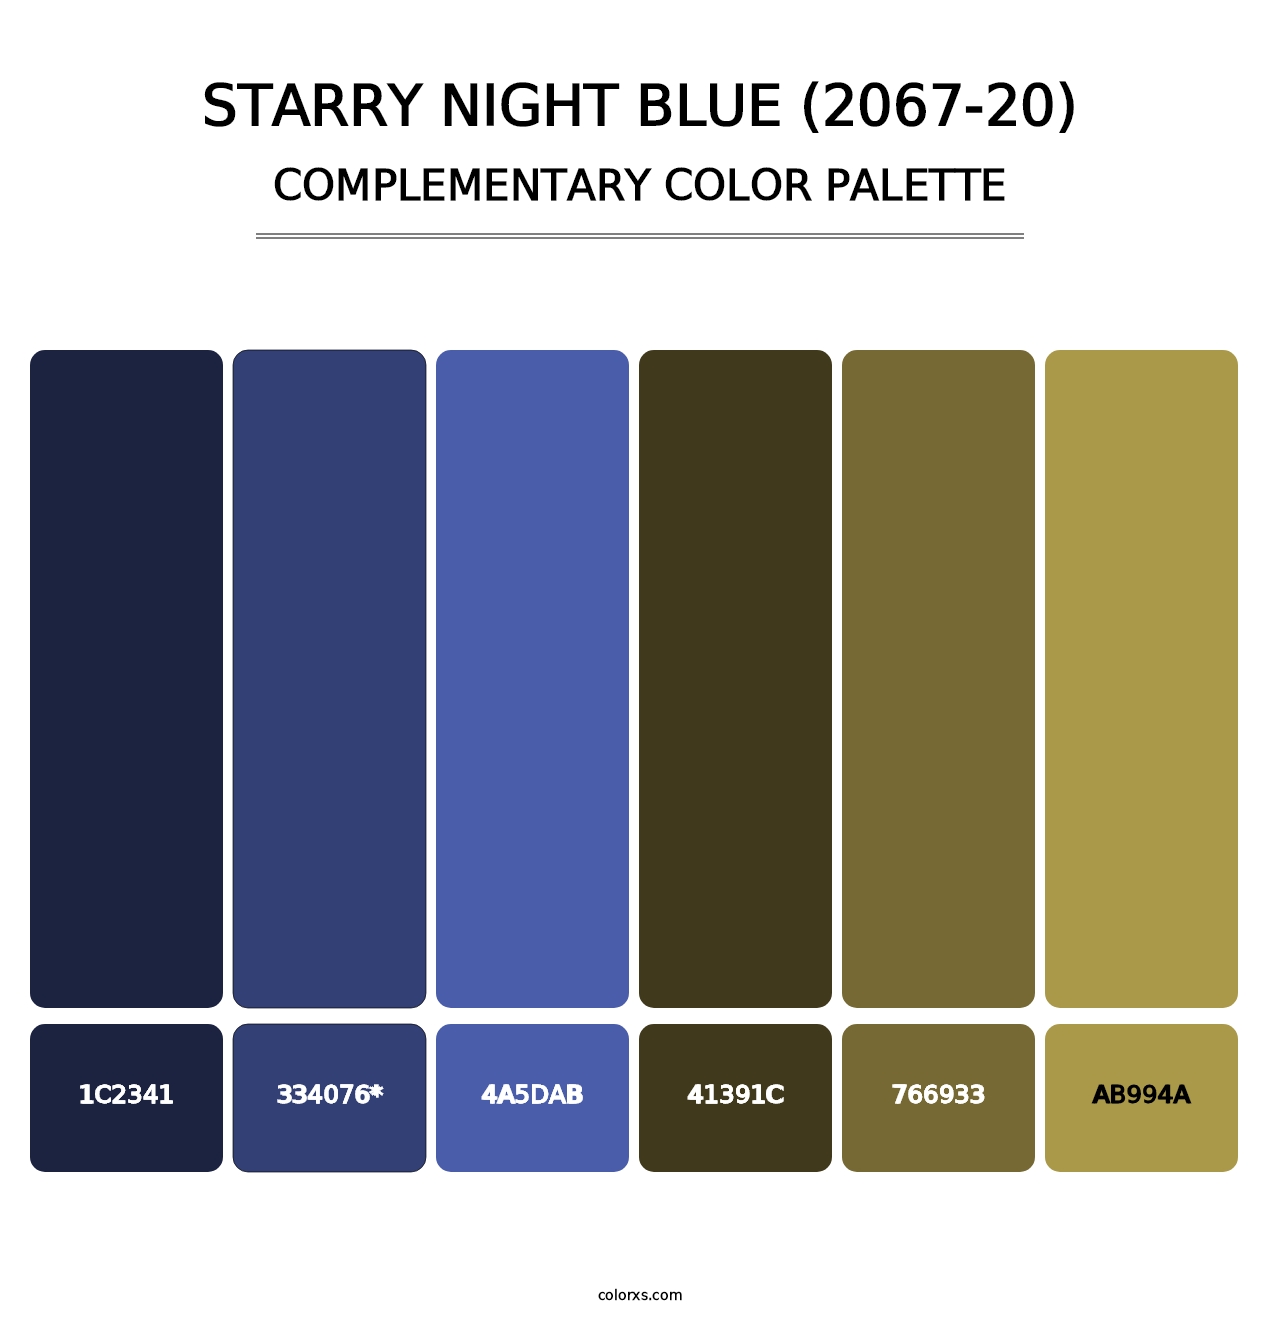 Starry Night Blue (2067-20) - Complementary Color Palette